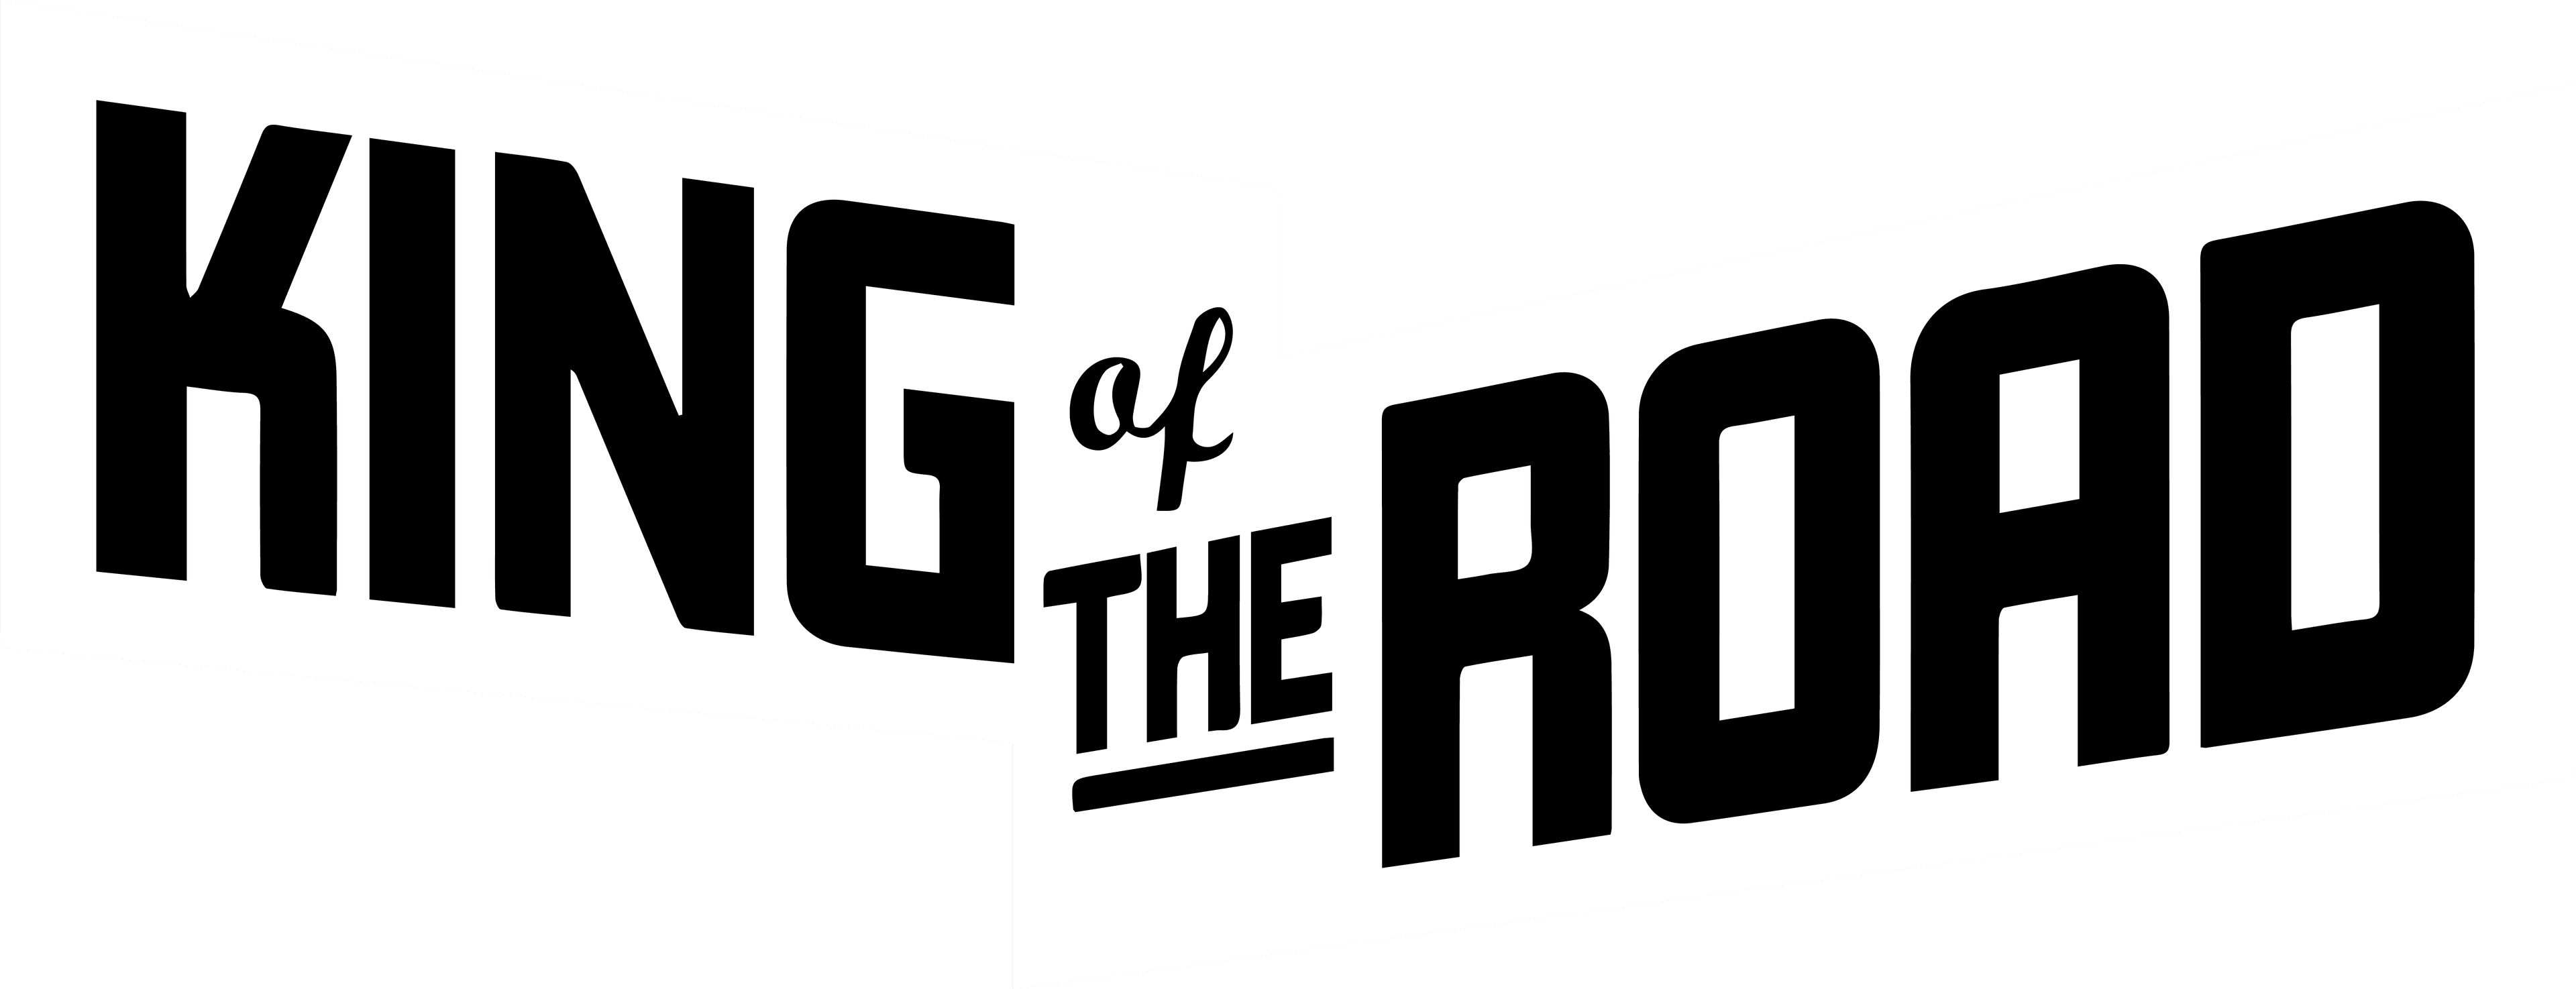 King of the Road logo